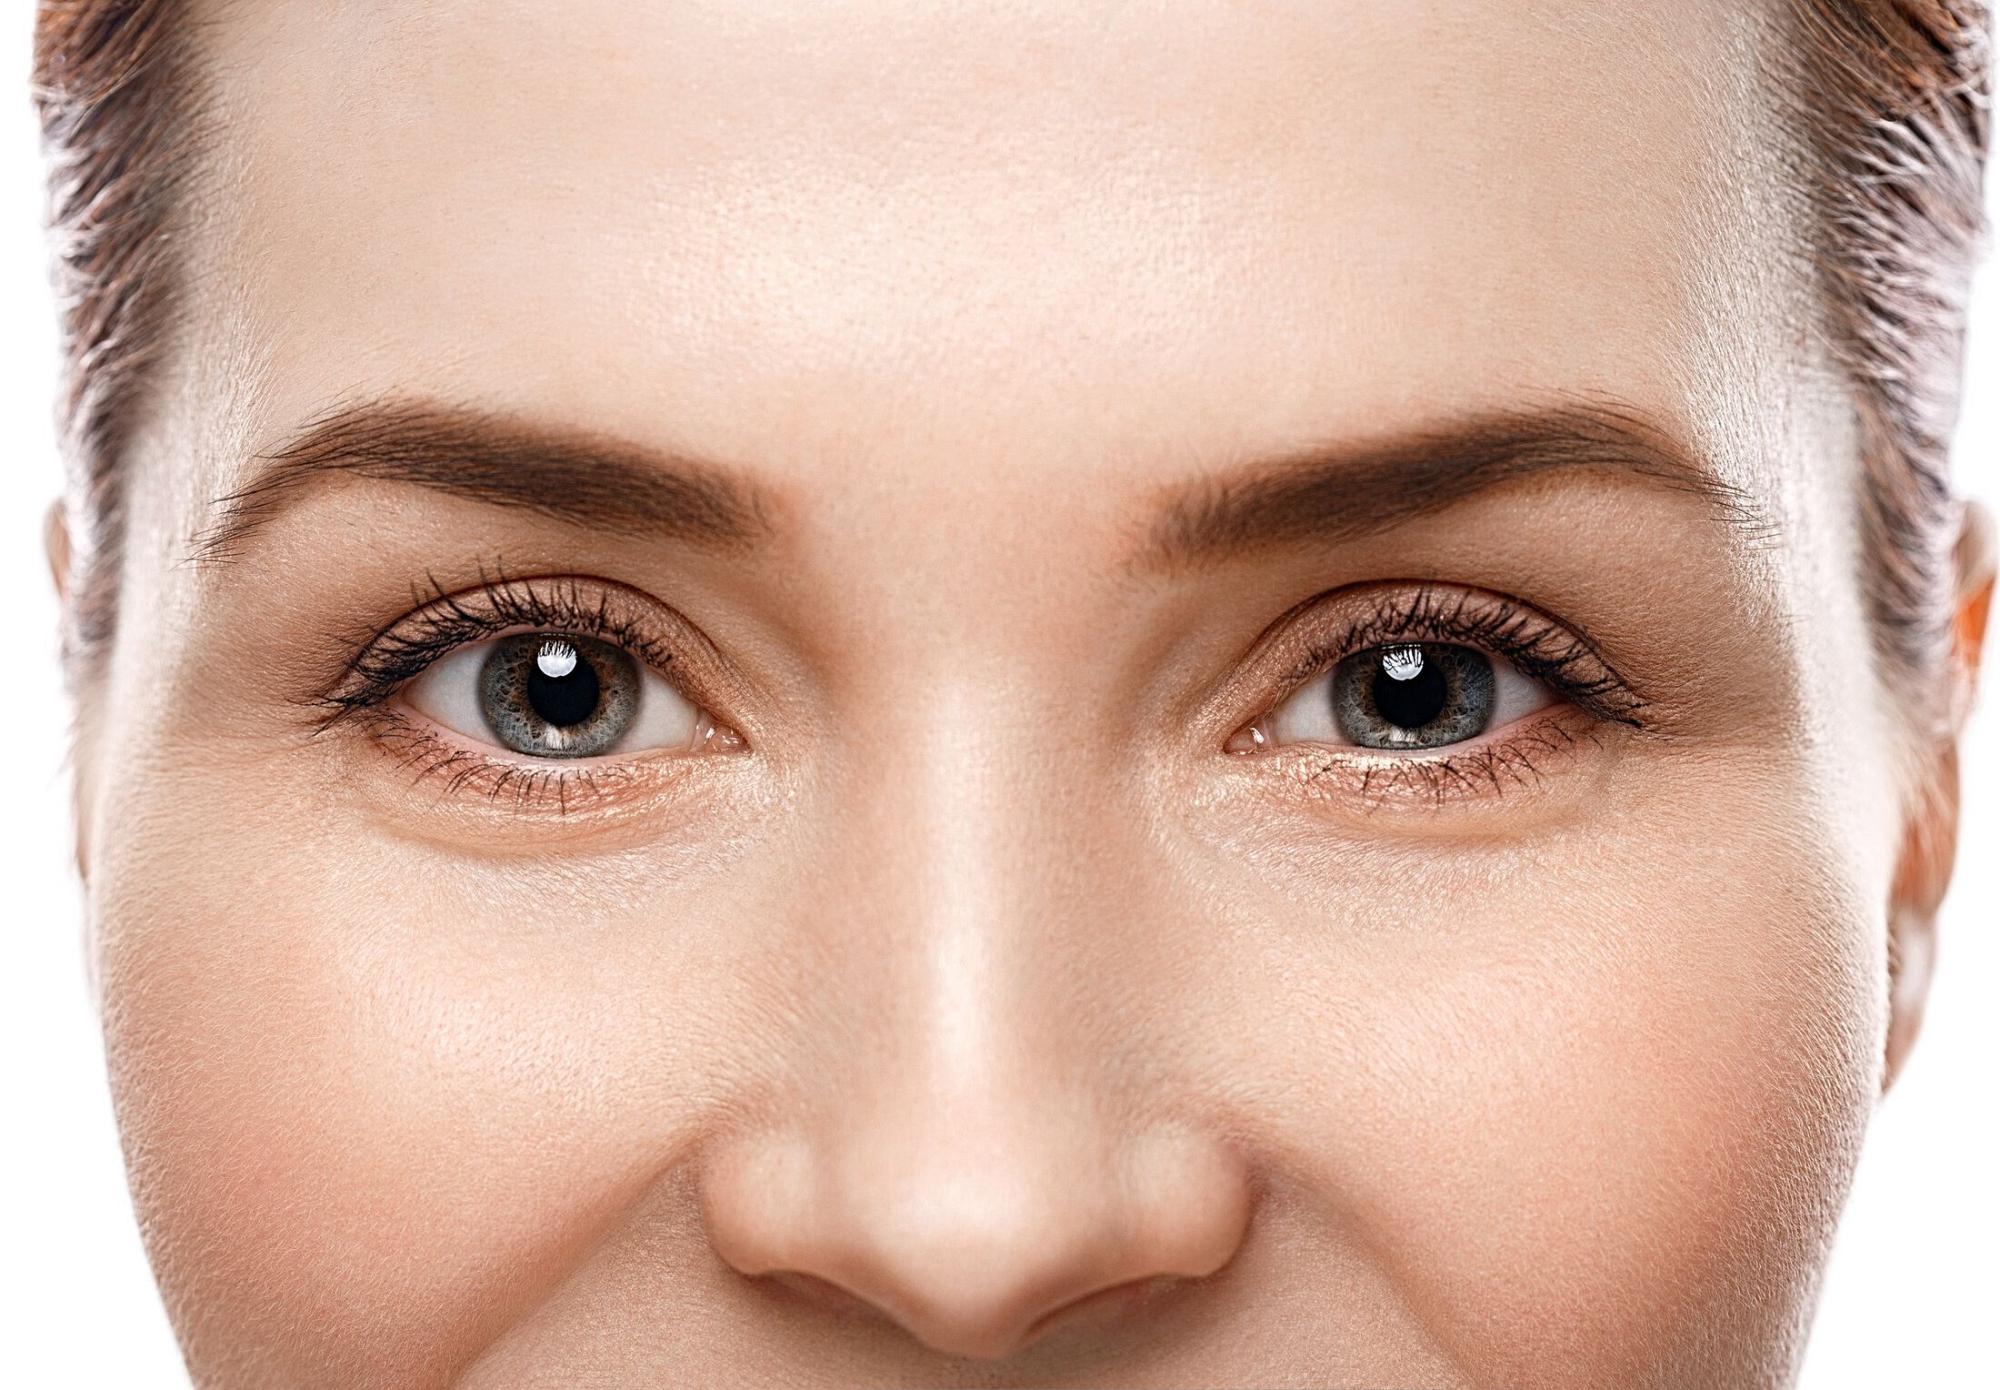 Up close photo of woman’s forehead, eyes, and nose